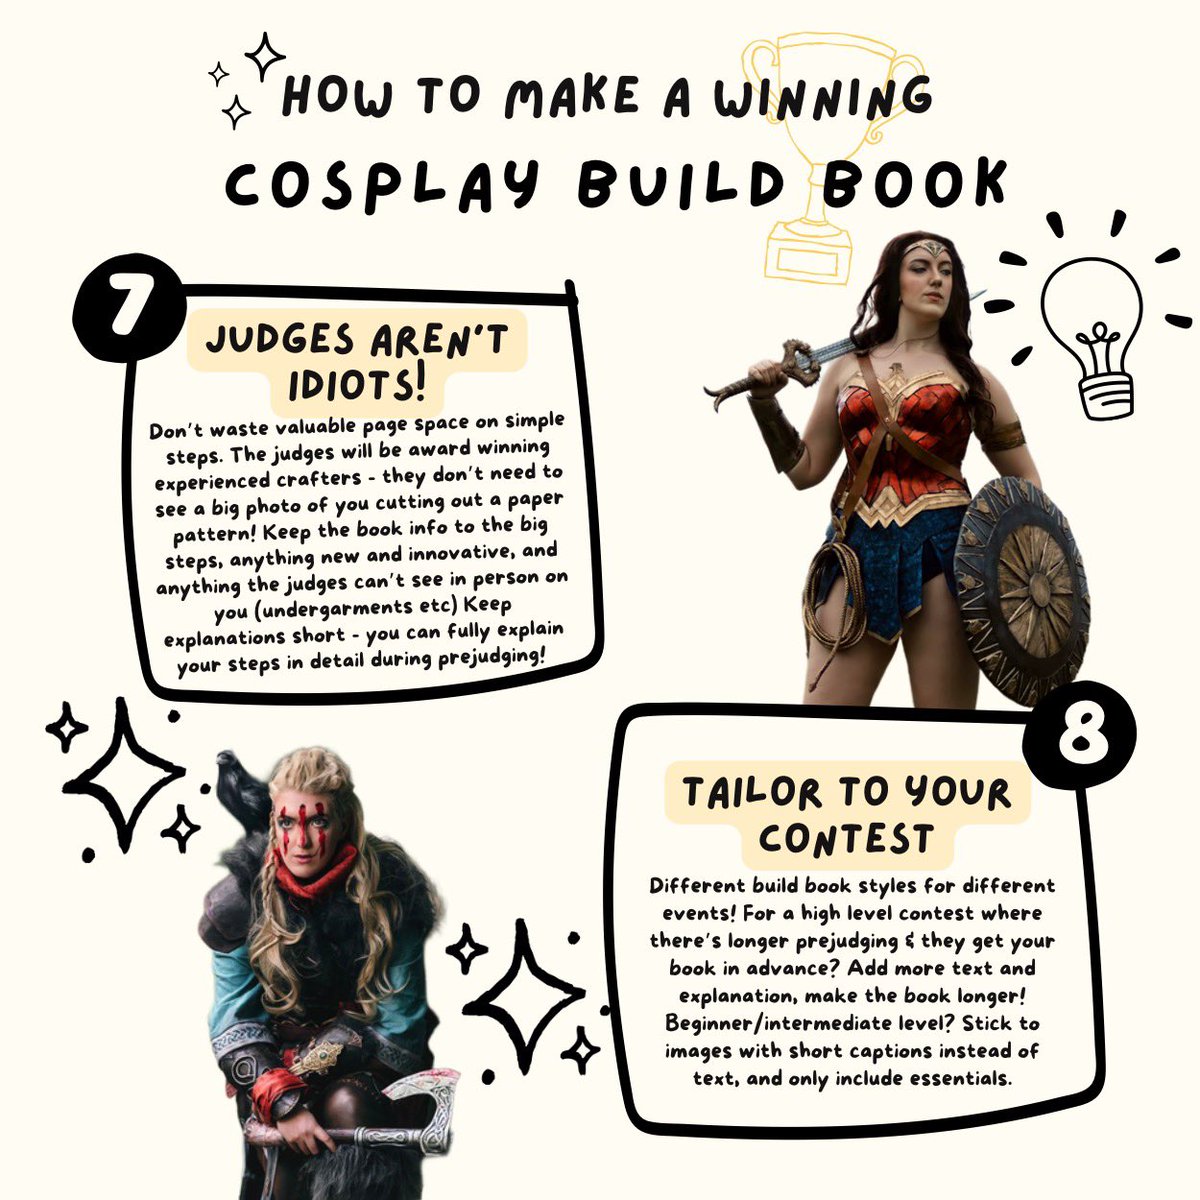 Have you ever struggled with making a Build Book for your Cosplay Contest? I’ve put together a little guide to help you have a great, clear and successful build book to guide you to competition glory! #cosplaycontest #cosplay